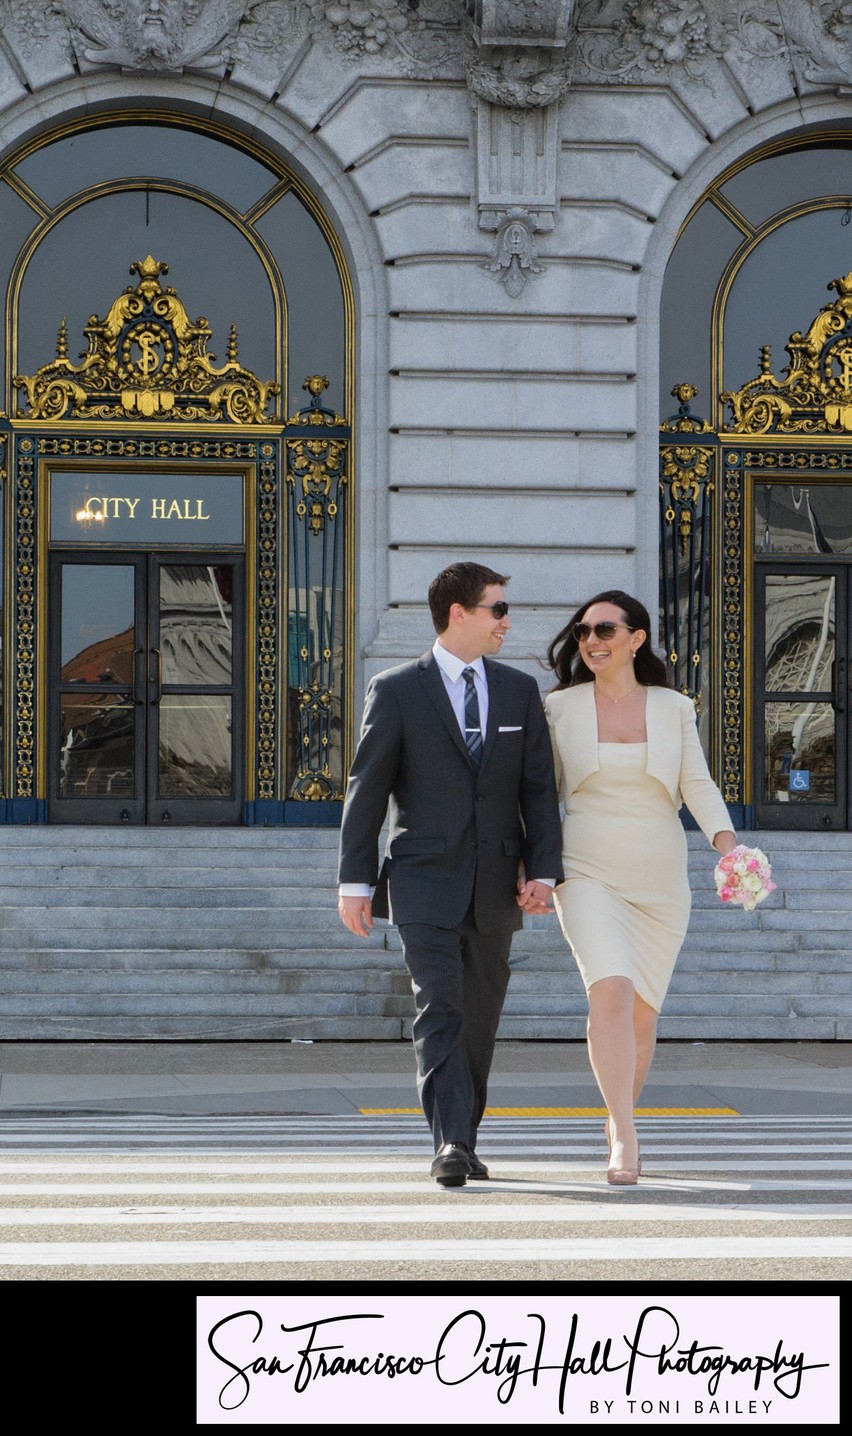 Happy Newlyweds departing SF City Hall - Wedding photography